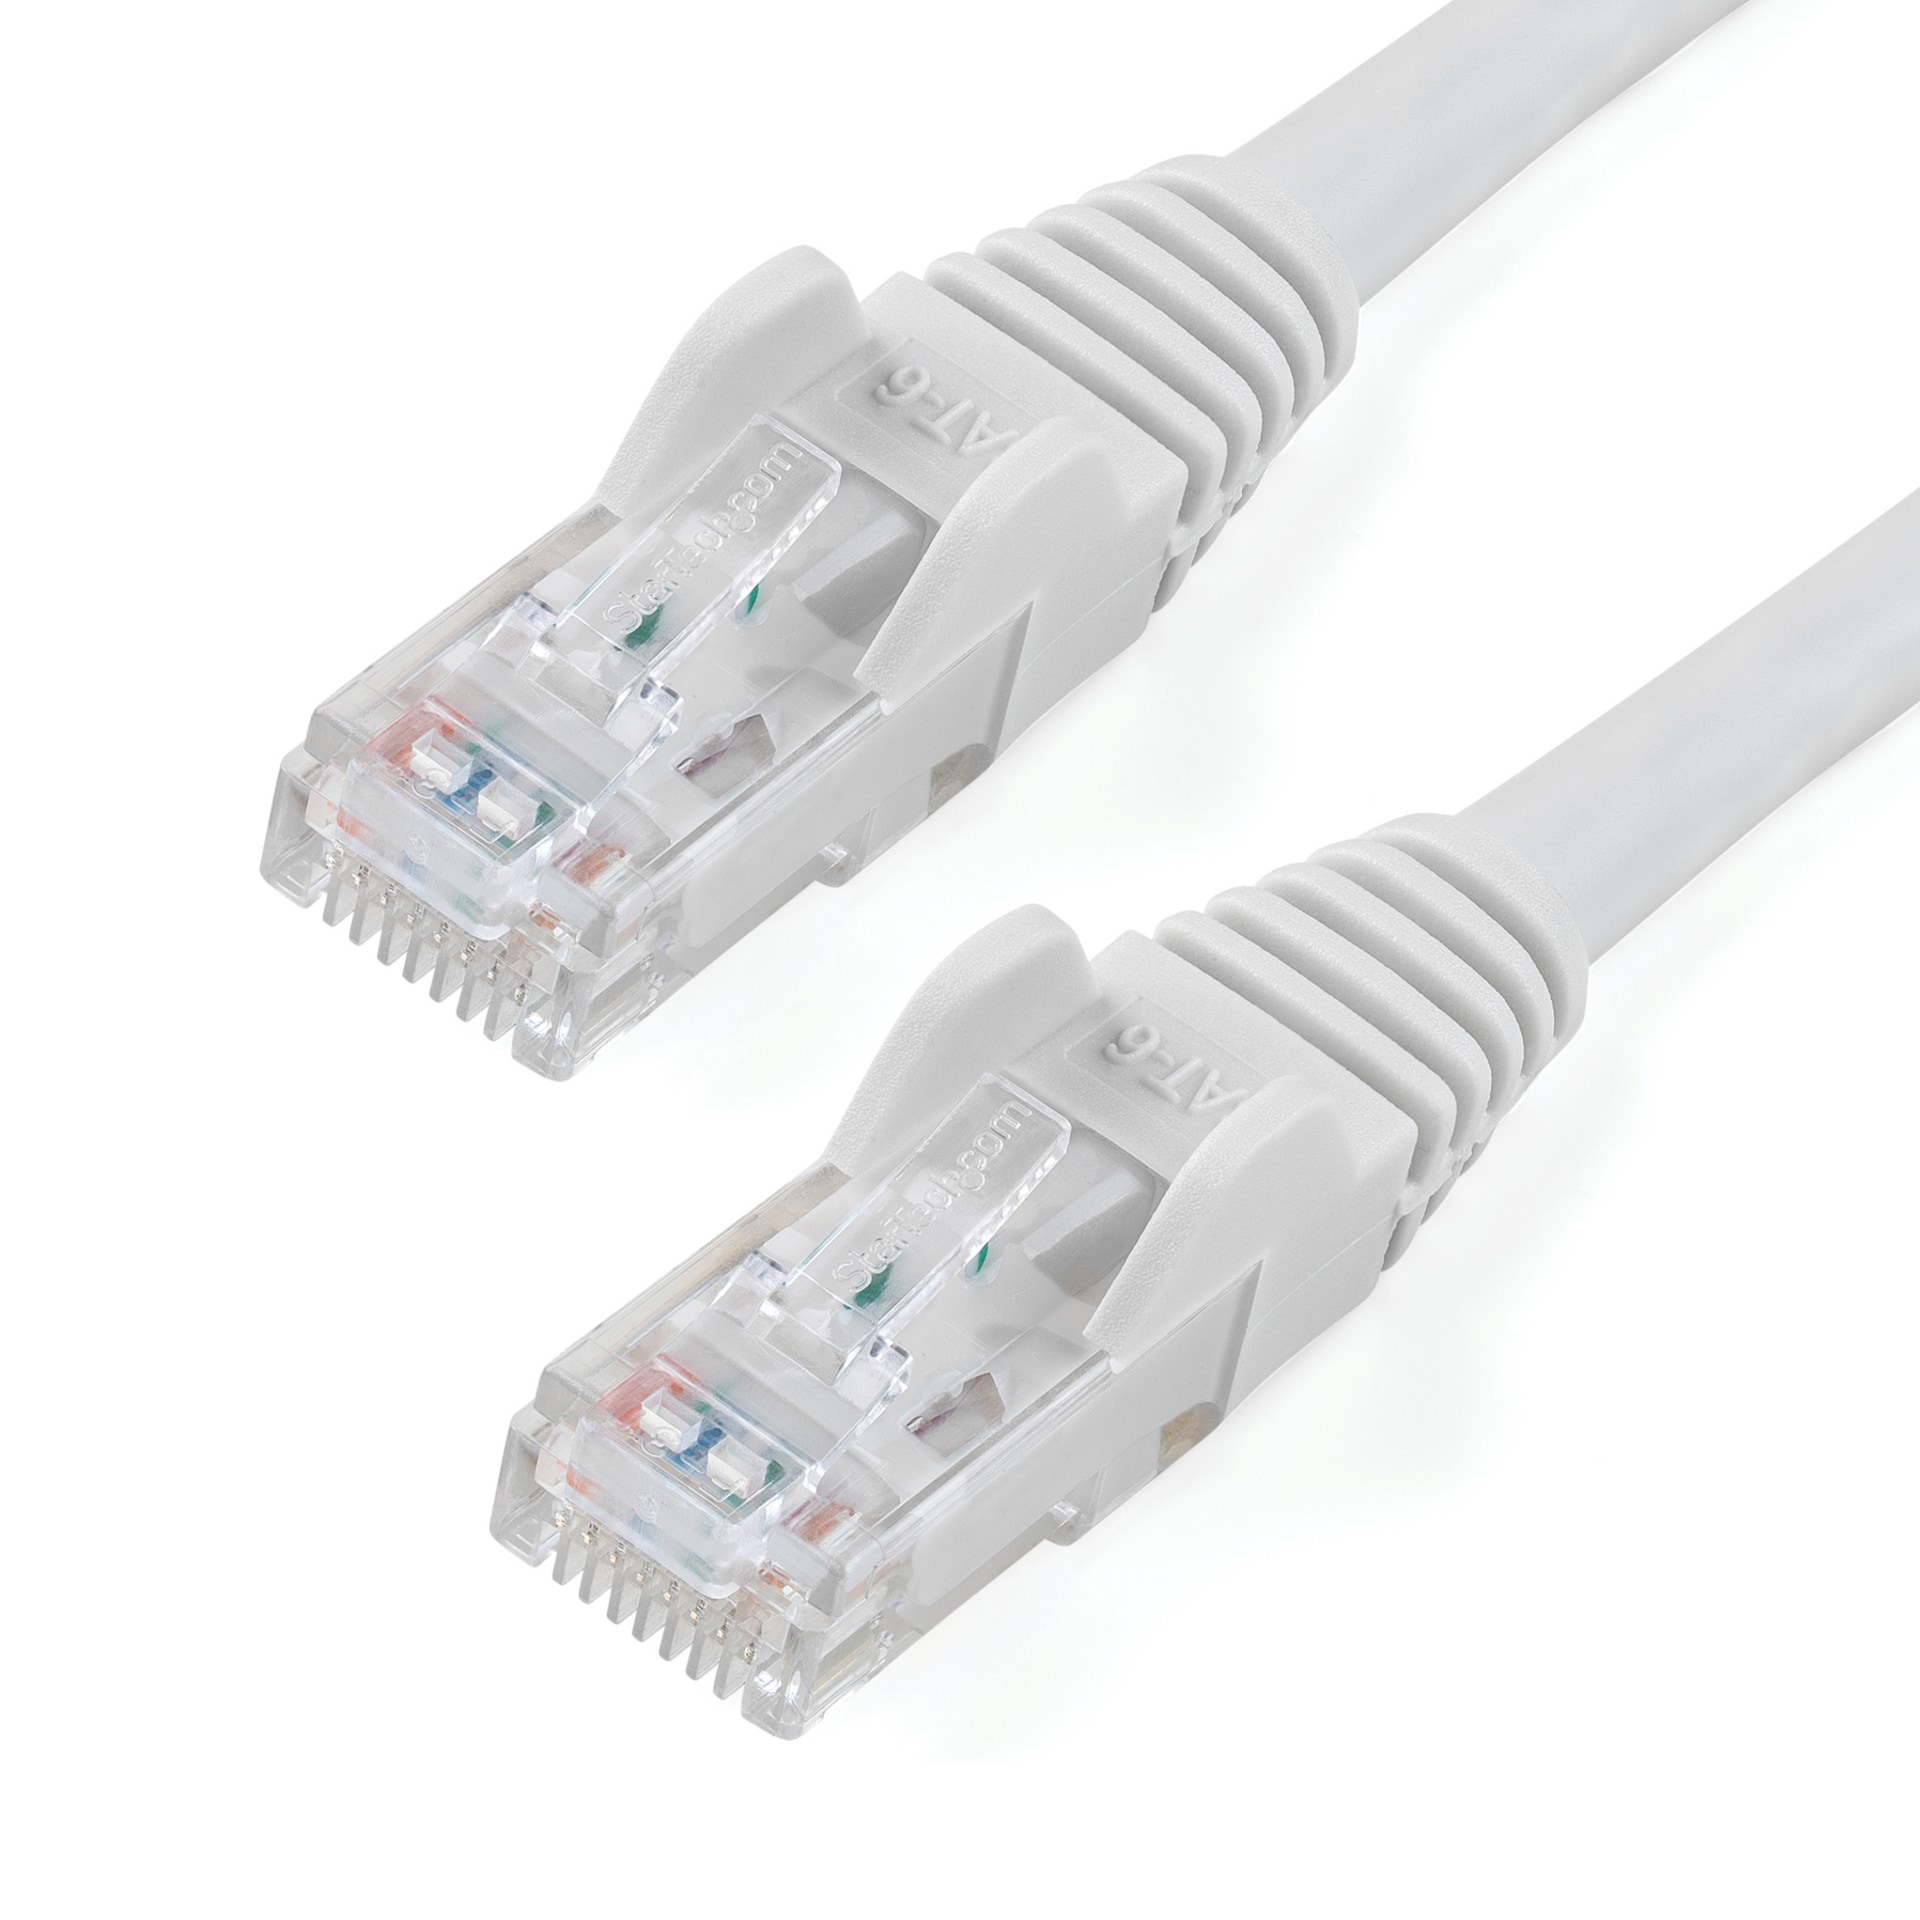 StarTech.com 10ft CAT6 Ethernet Cable White Snagless UTP CAT 6 Gigabit Cord/Wire 100W PoE 650MHz